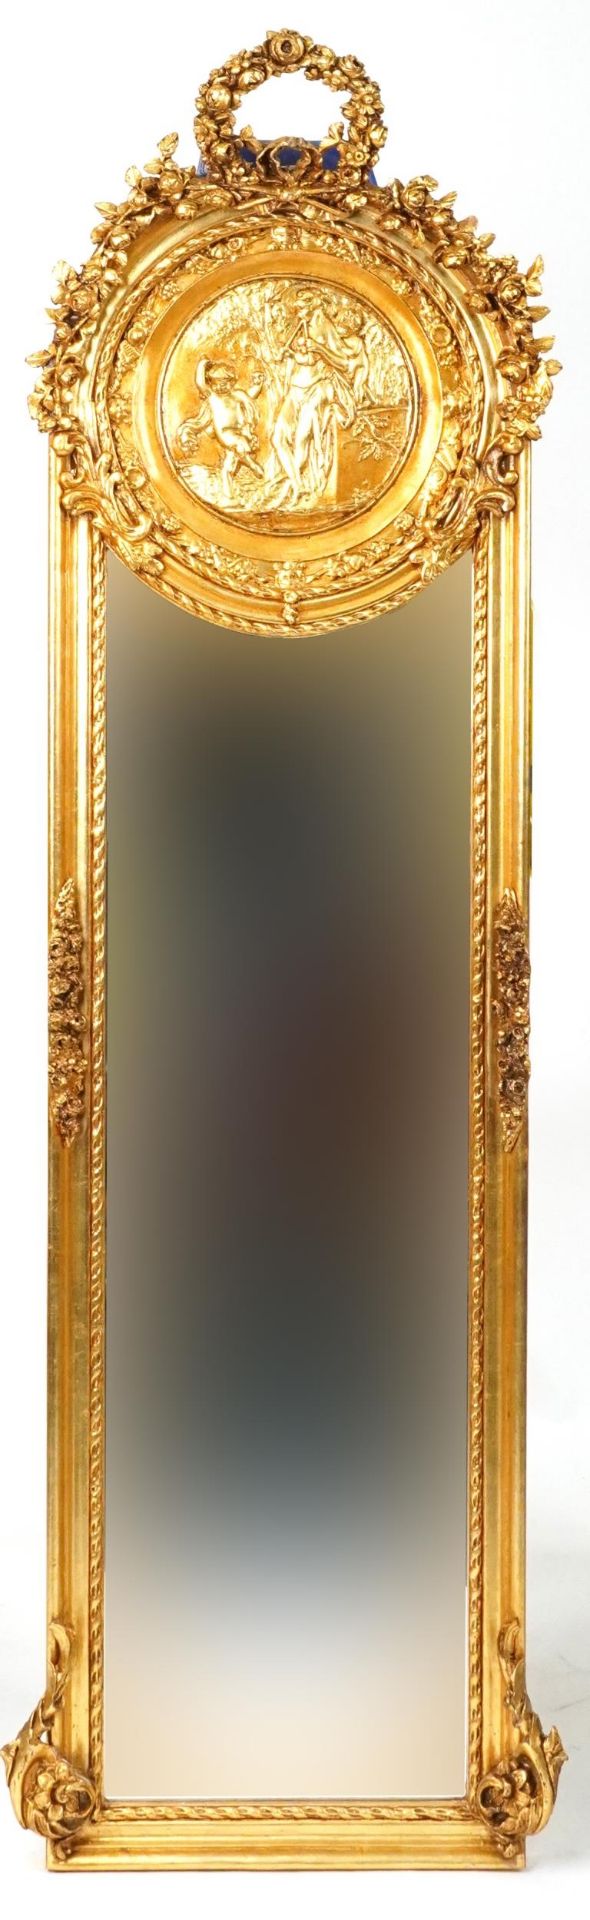 M pair of French Empire style ornate gilt framed wall mirrors with wreath crests and bevelled glass, - Bild 2 aus 6